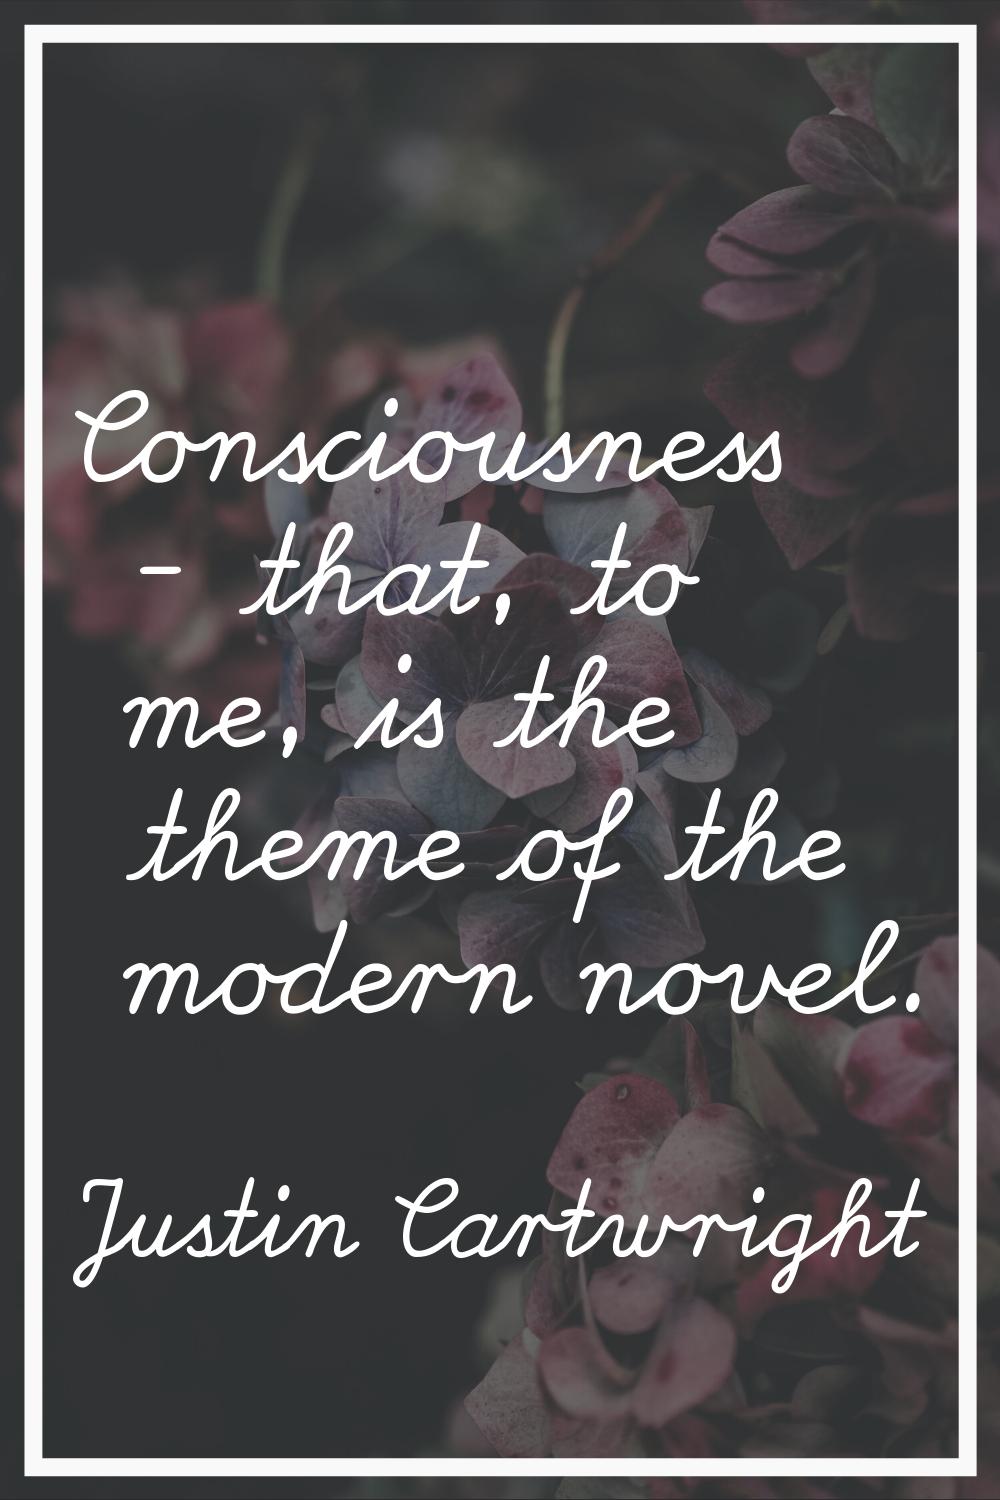 Consciousness - that, to me, is the theme of the modern novel.